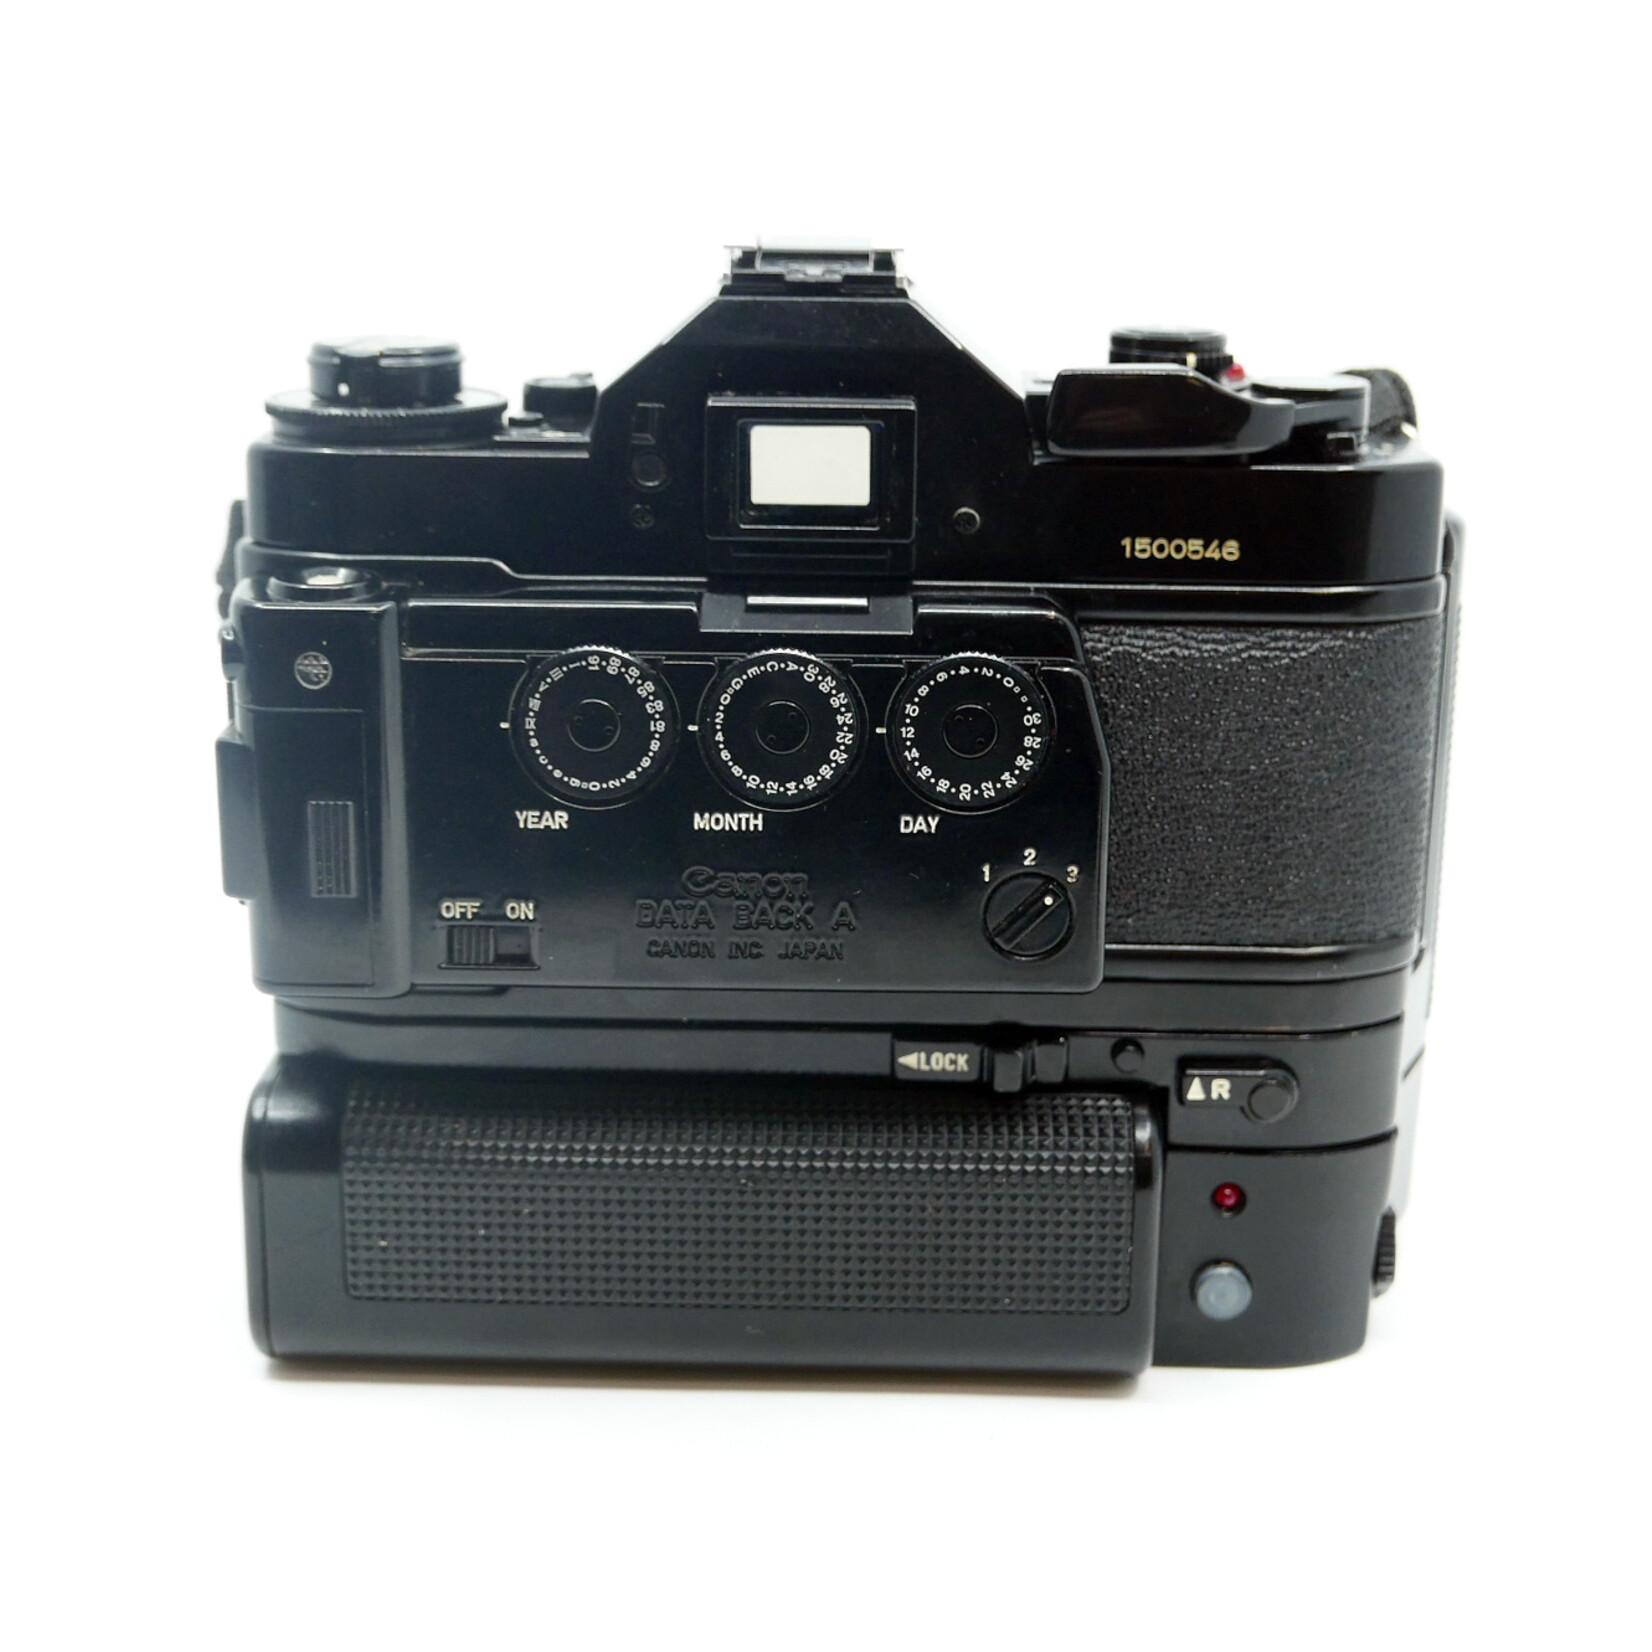 Canon A-1 w/50mm f/1.4, Motor Drive/Battery Pack, & Data Back (Used)